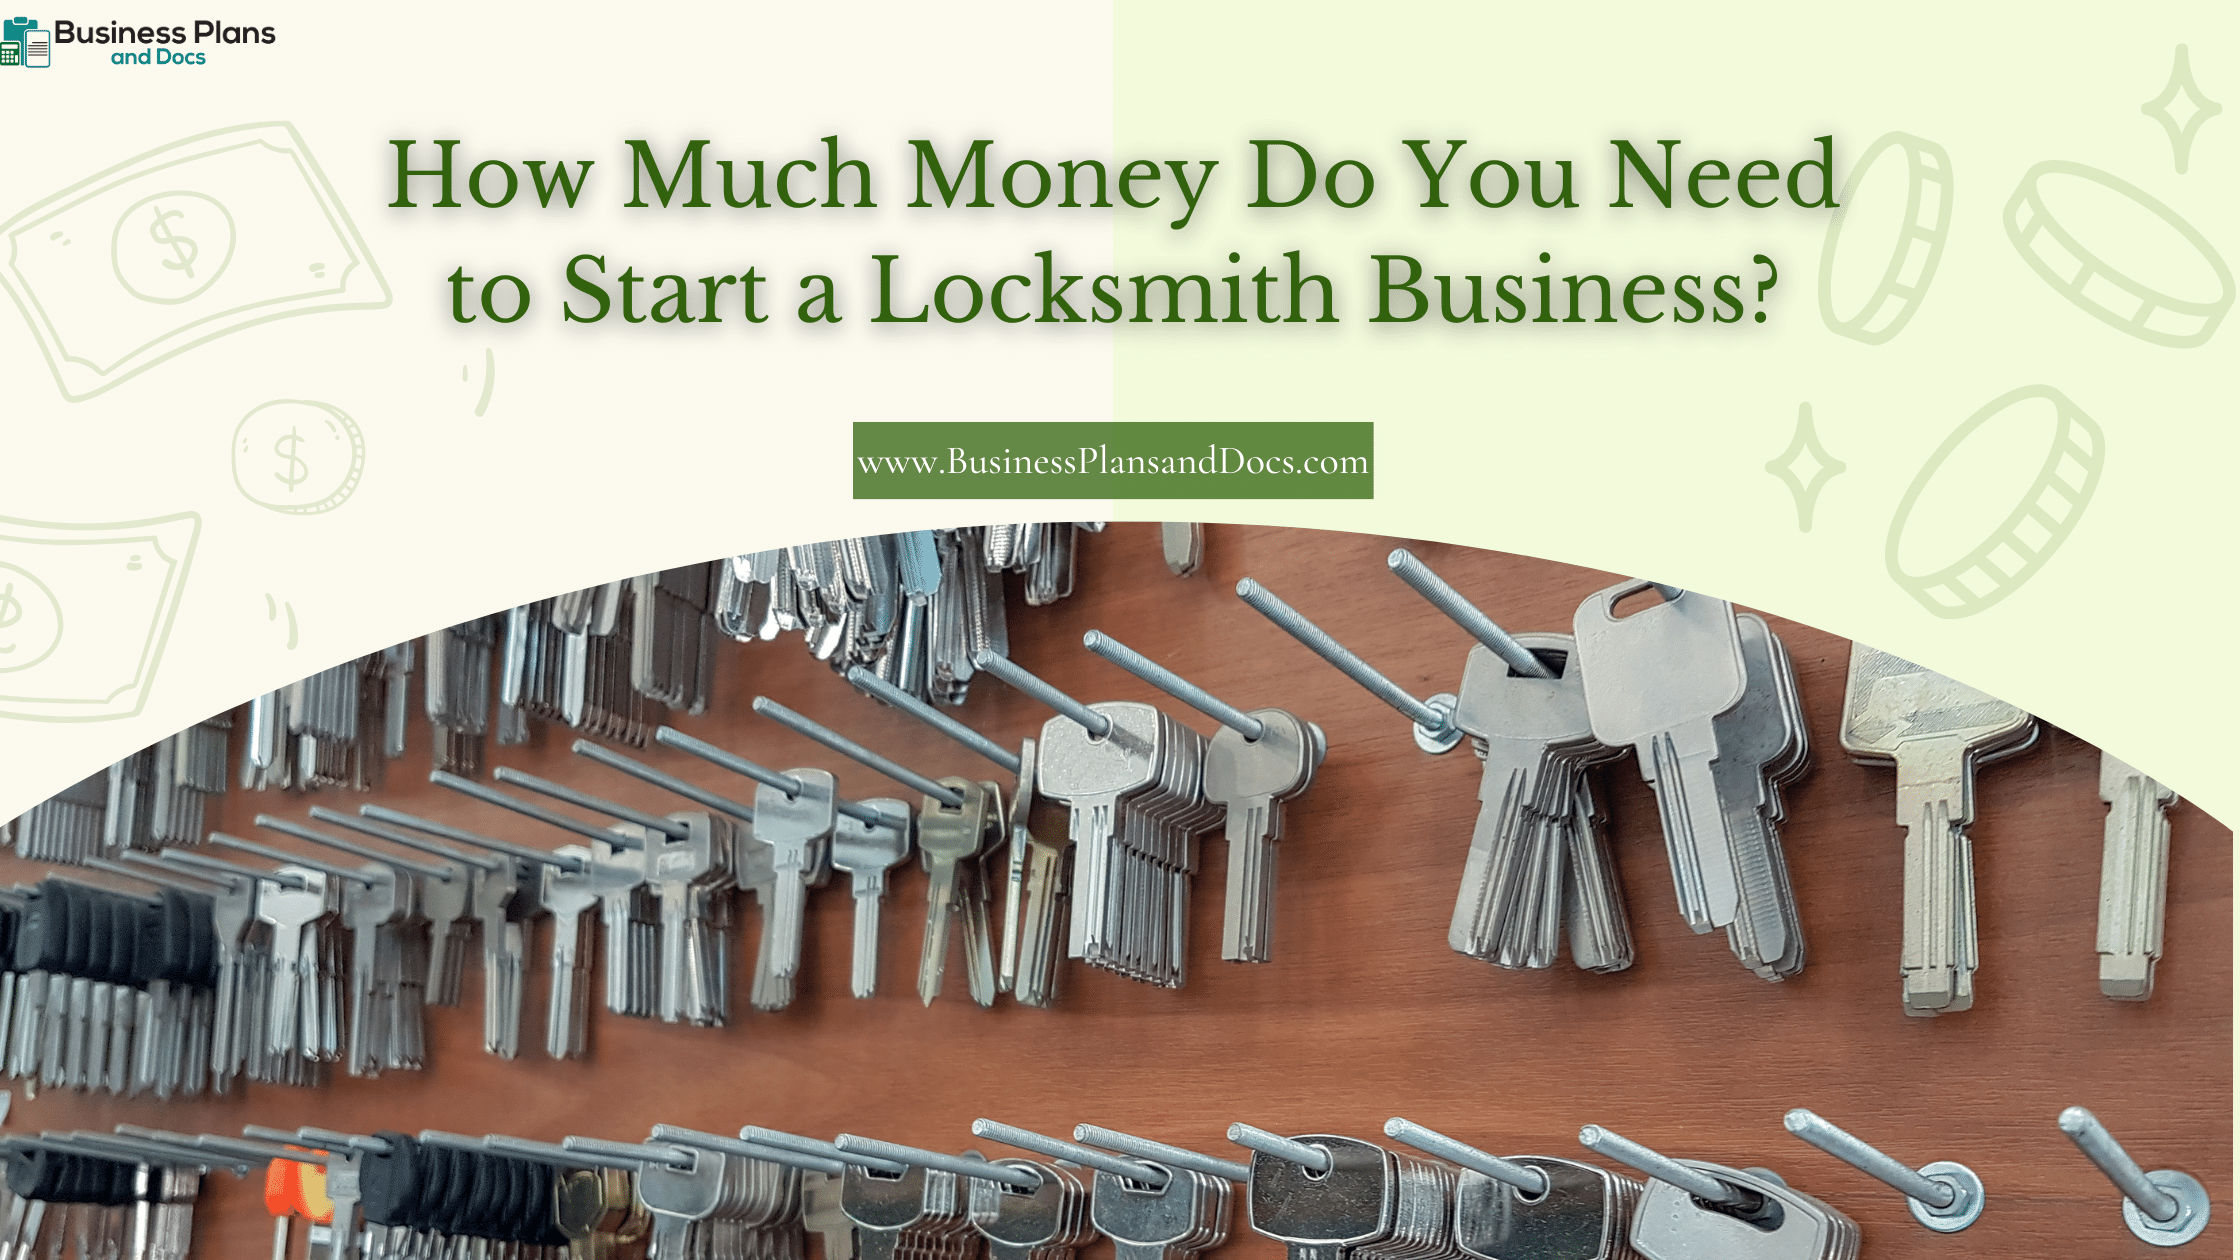 How Much Money Do You Need to Start a Locksmith Business?